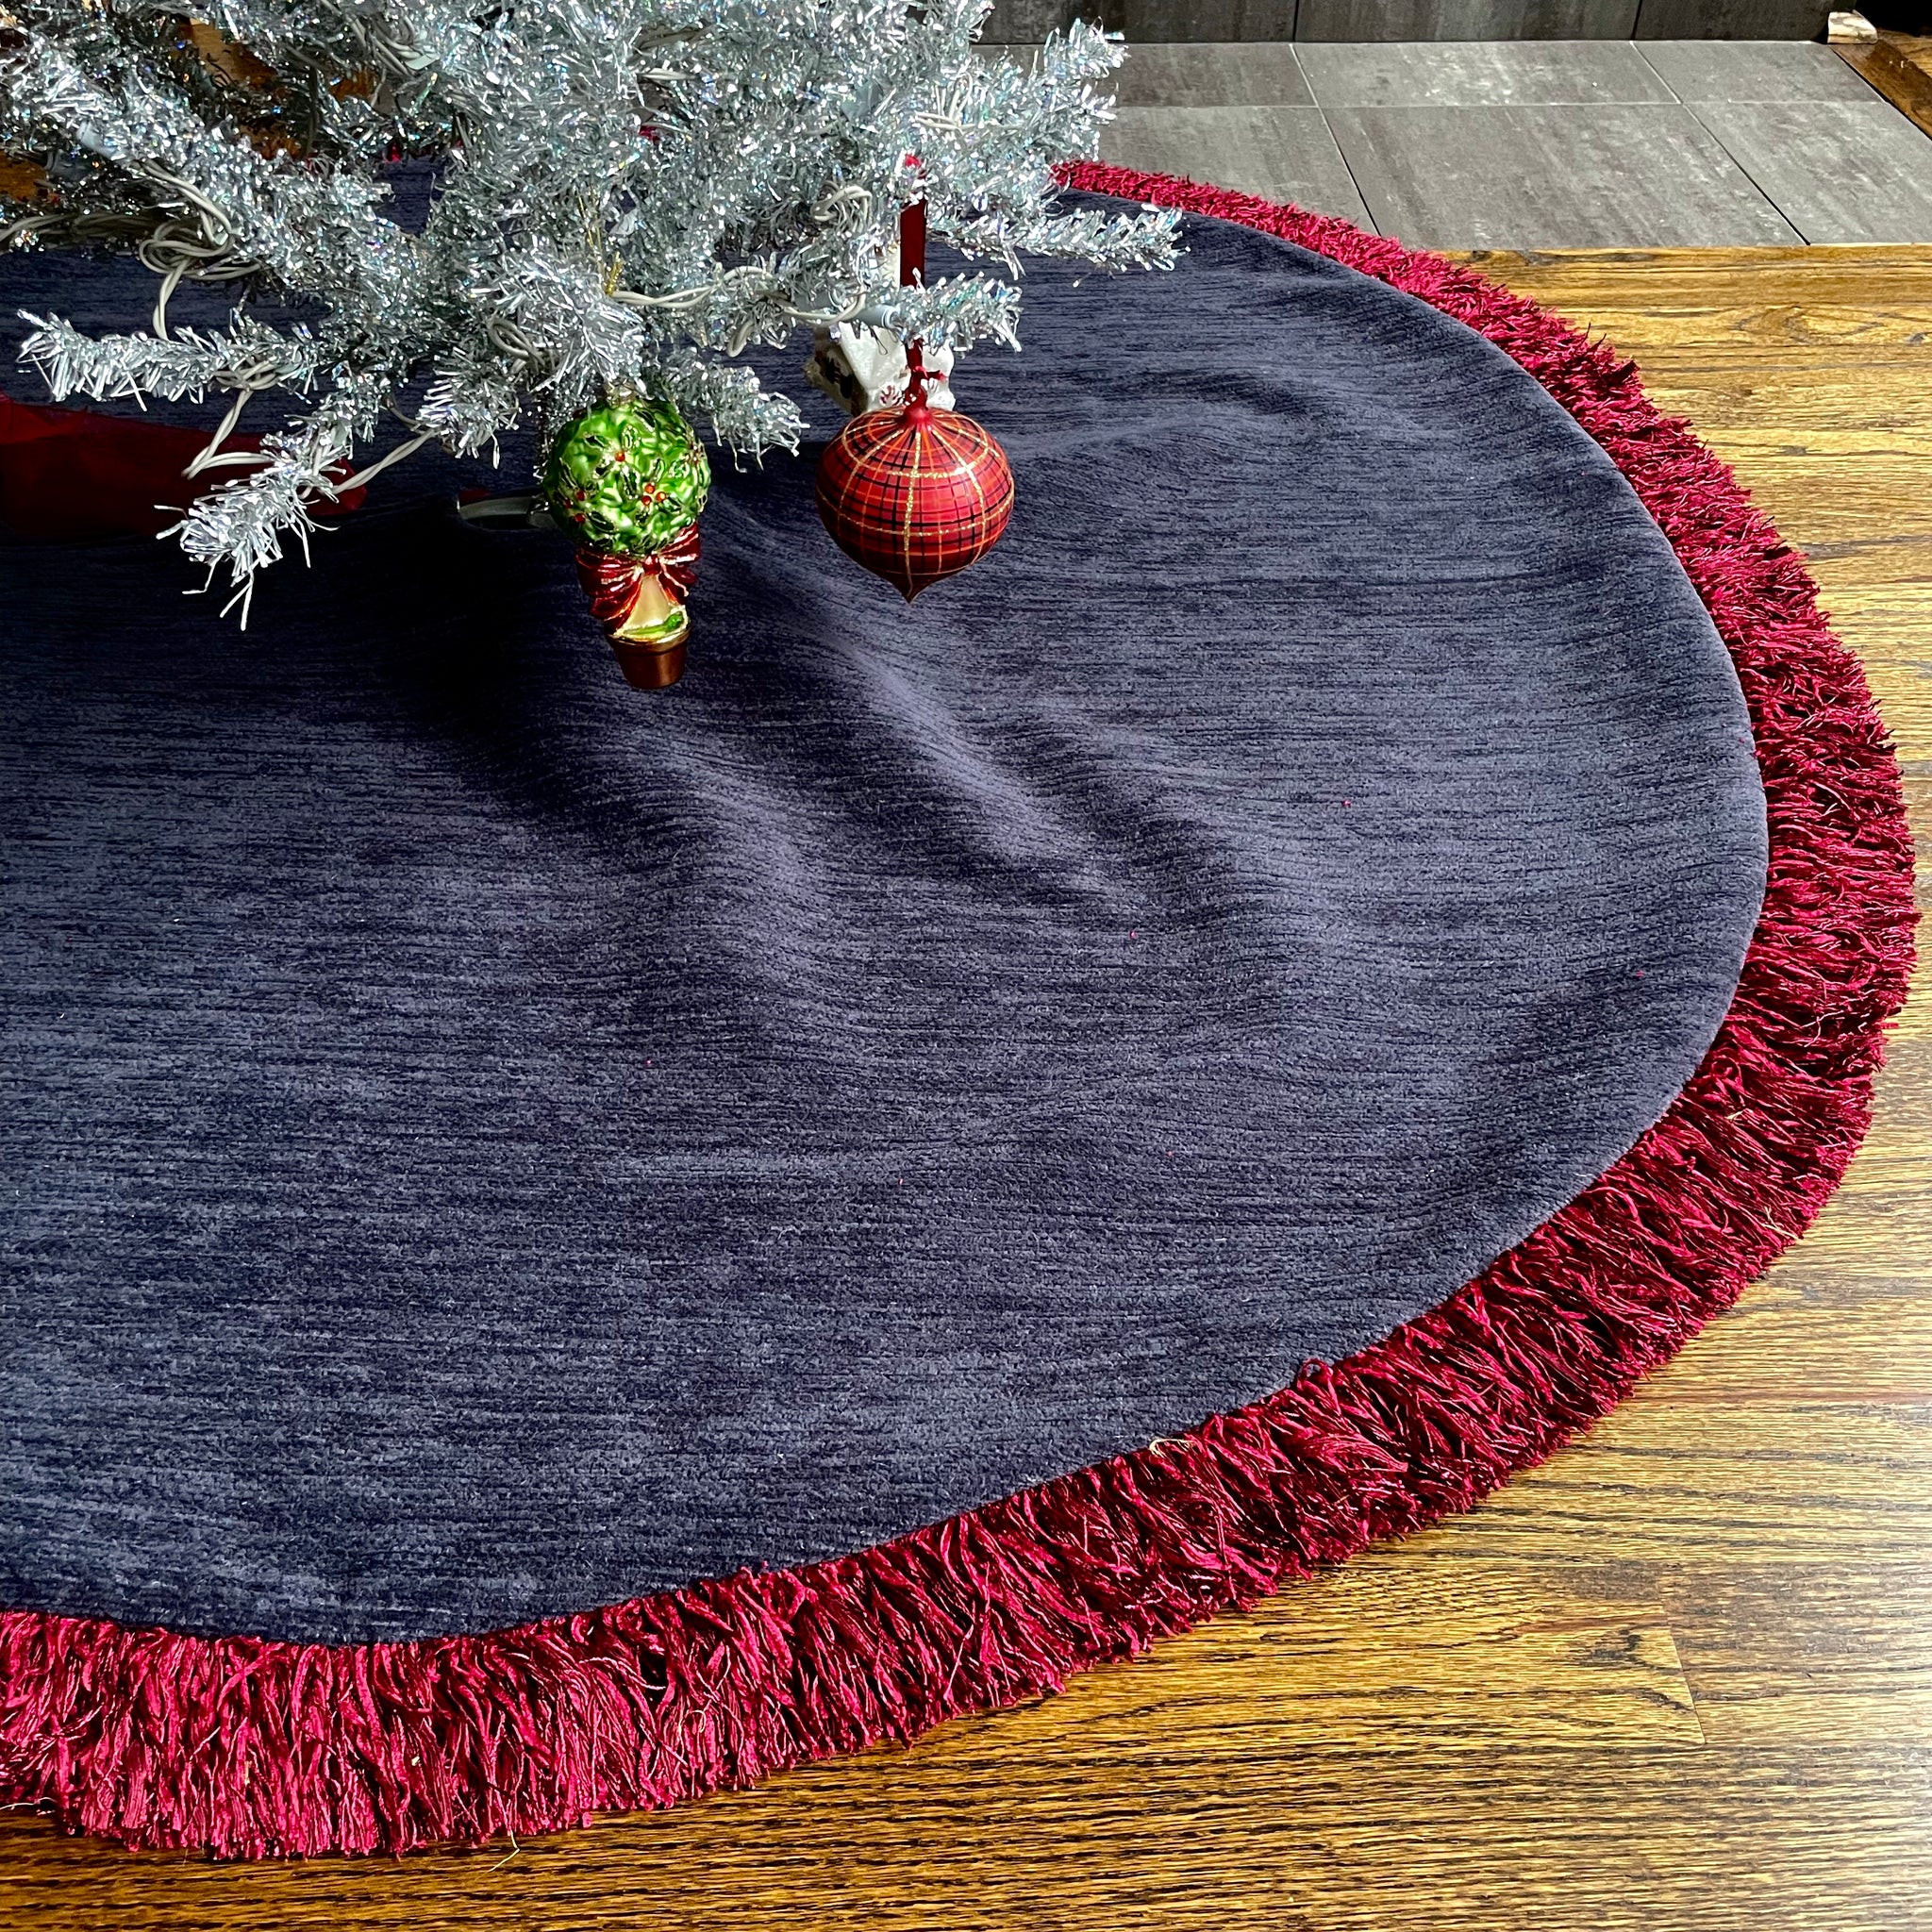 48" Navy Blue, Gray and Silver Christmas Tree Skirt with Red Fringe | Reversible